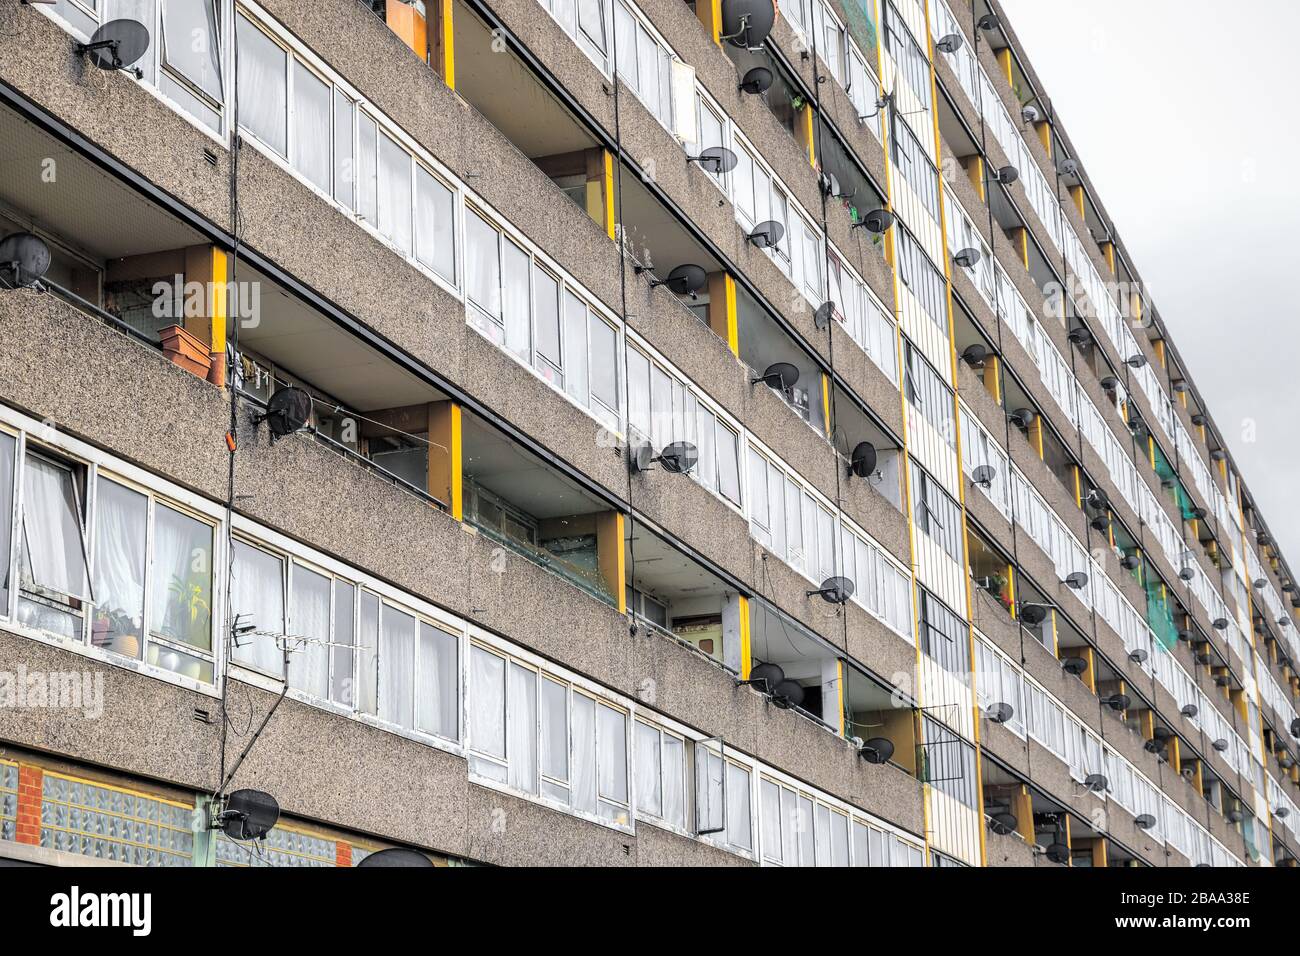 Facade of council tower block Taplow, part of the Aylesbury Estate located in Walworth, South East London Stock Photo